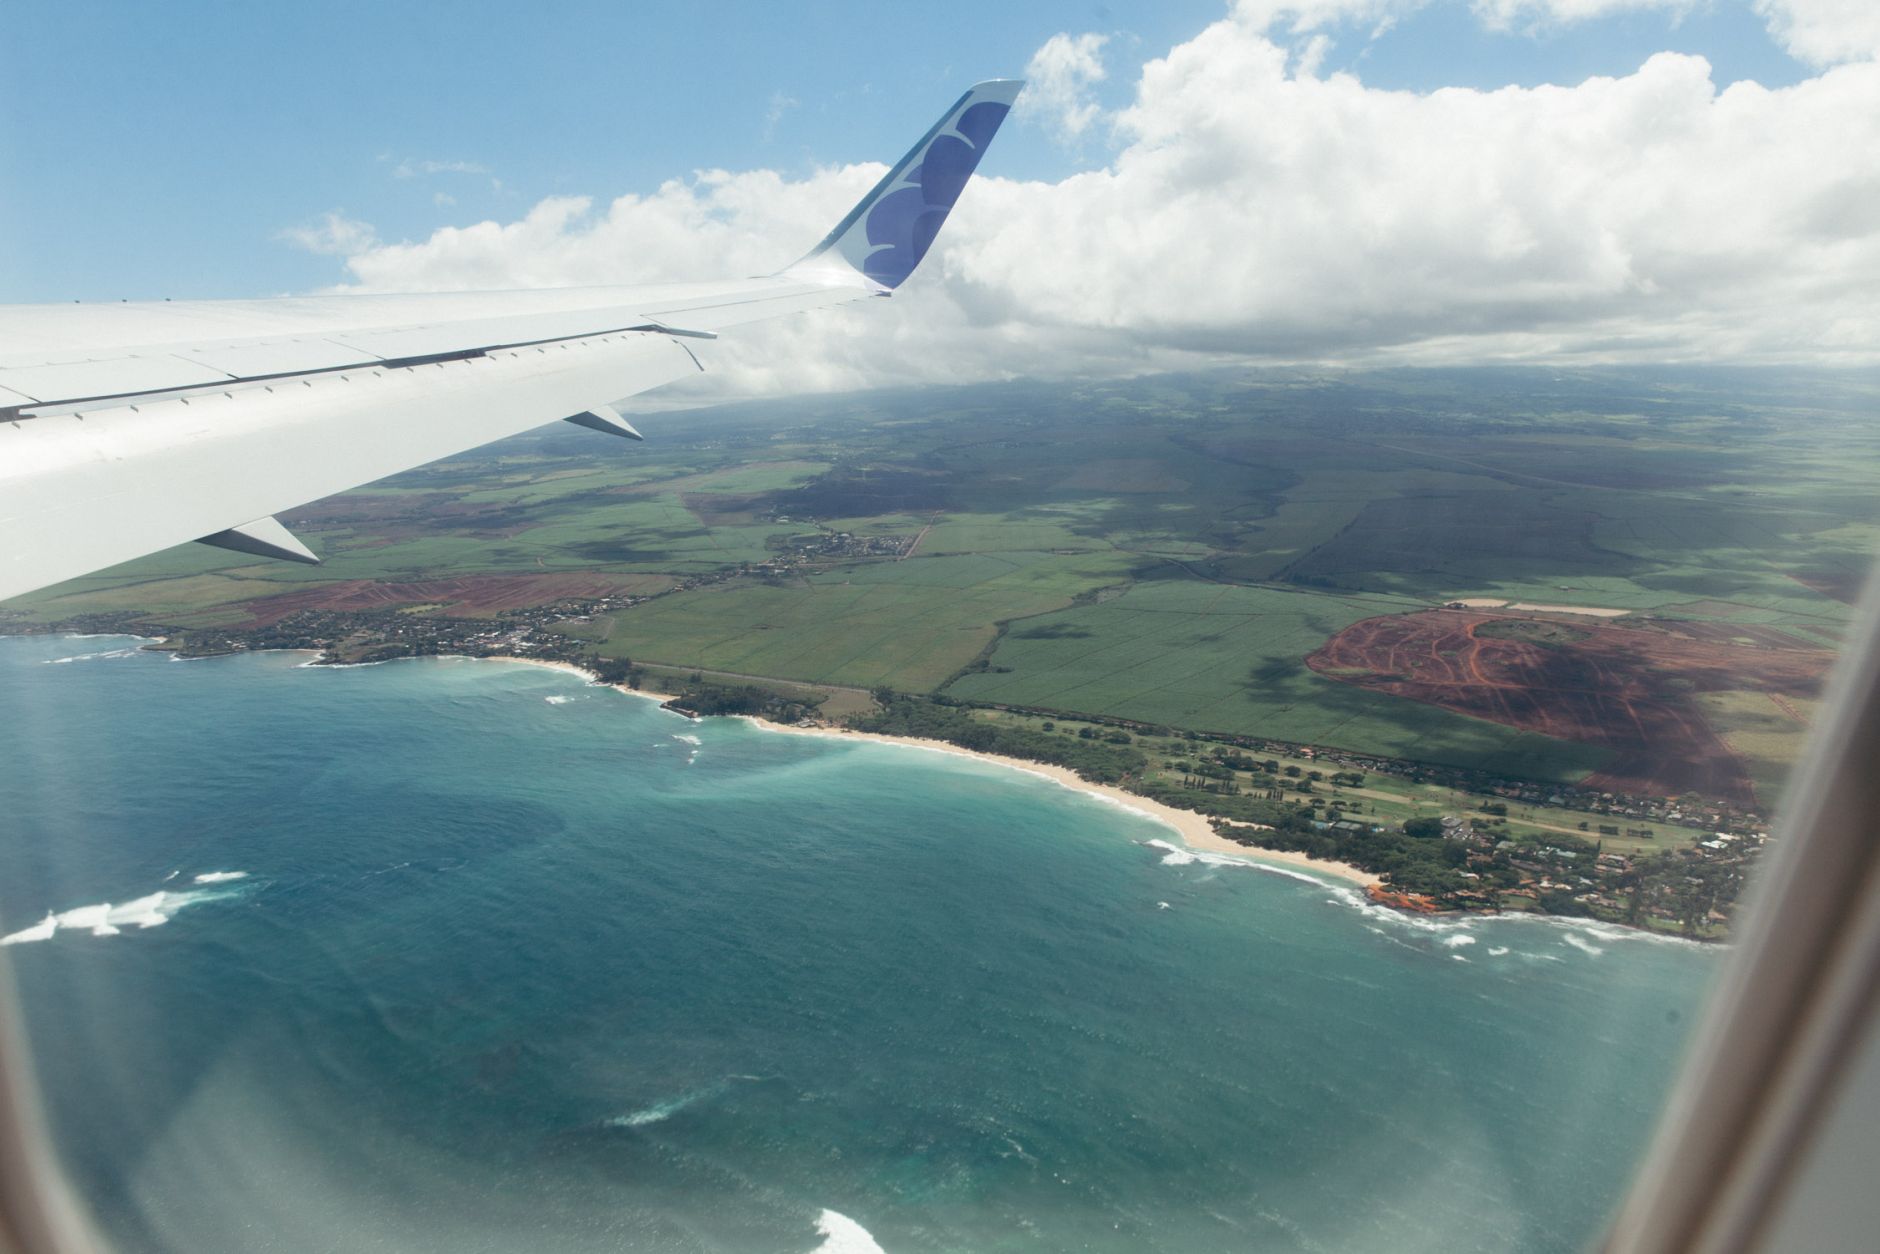 View of Mau'i and the Pacific Ocean from the plane